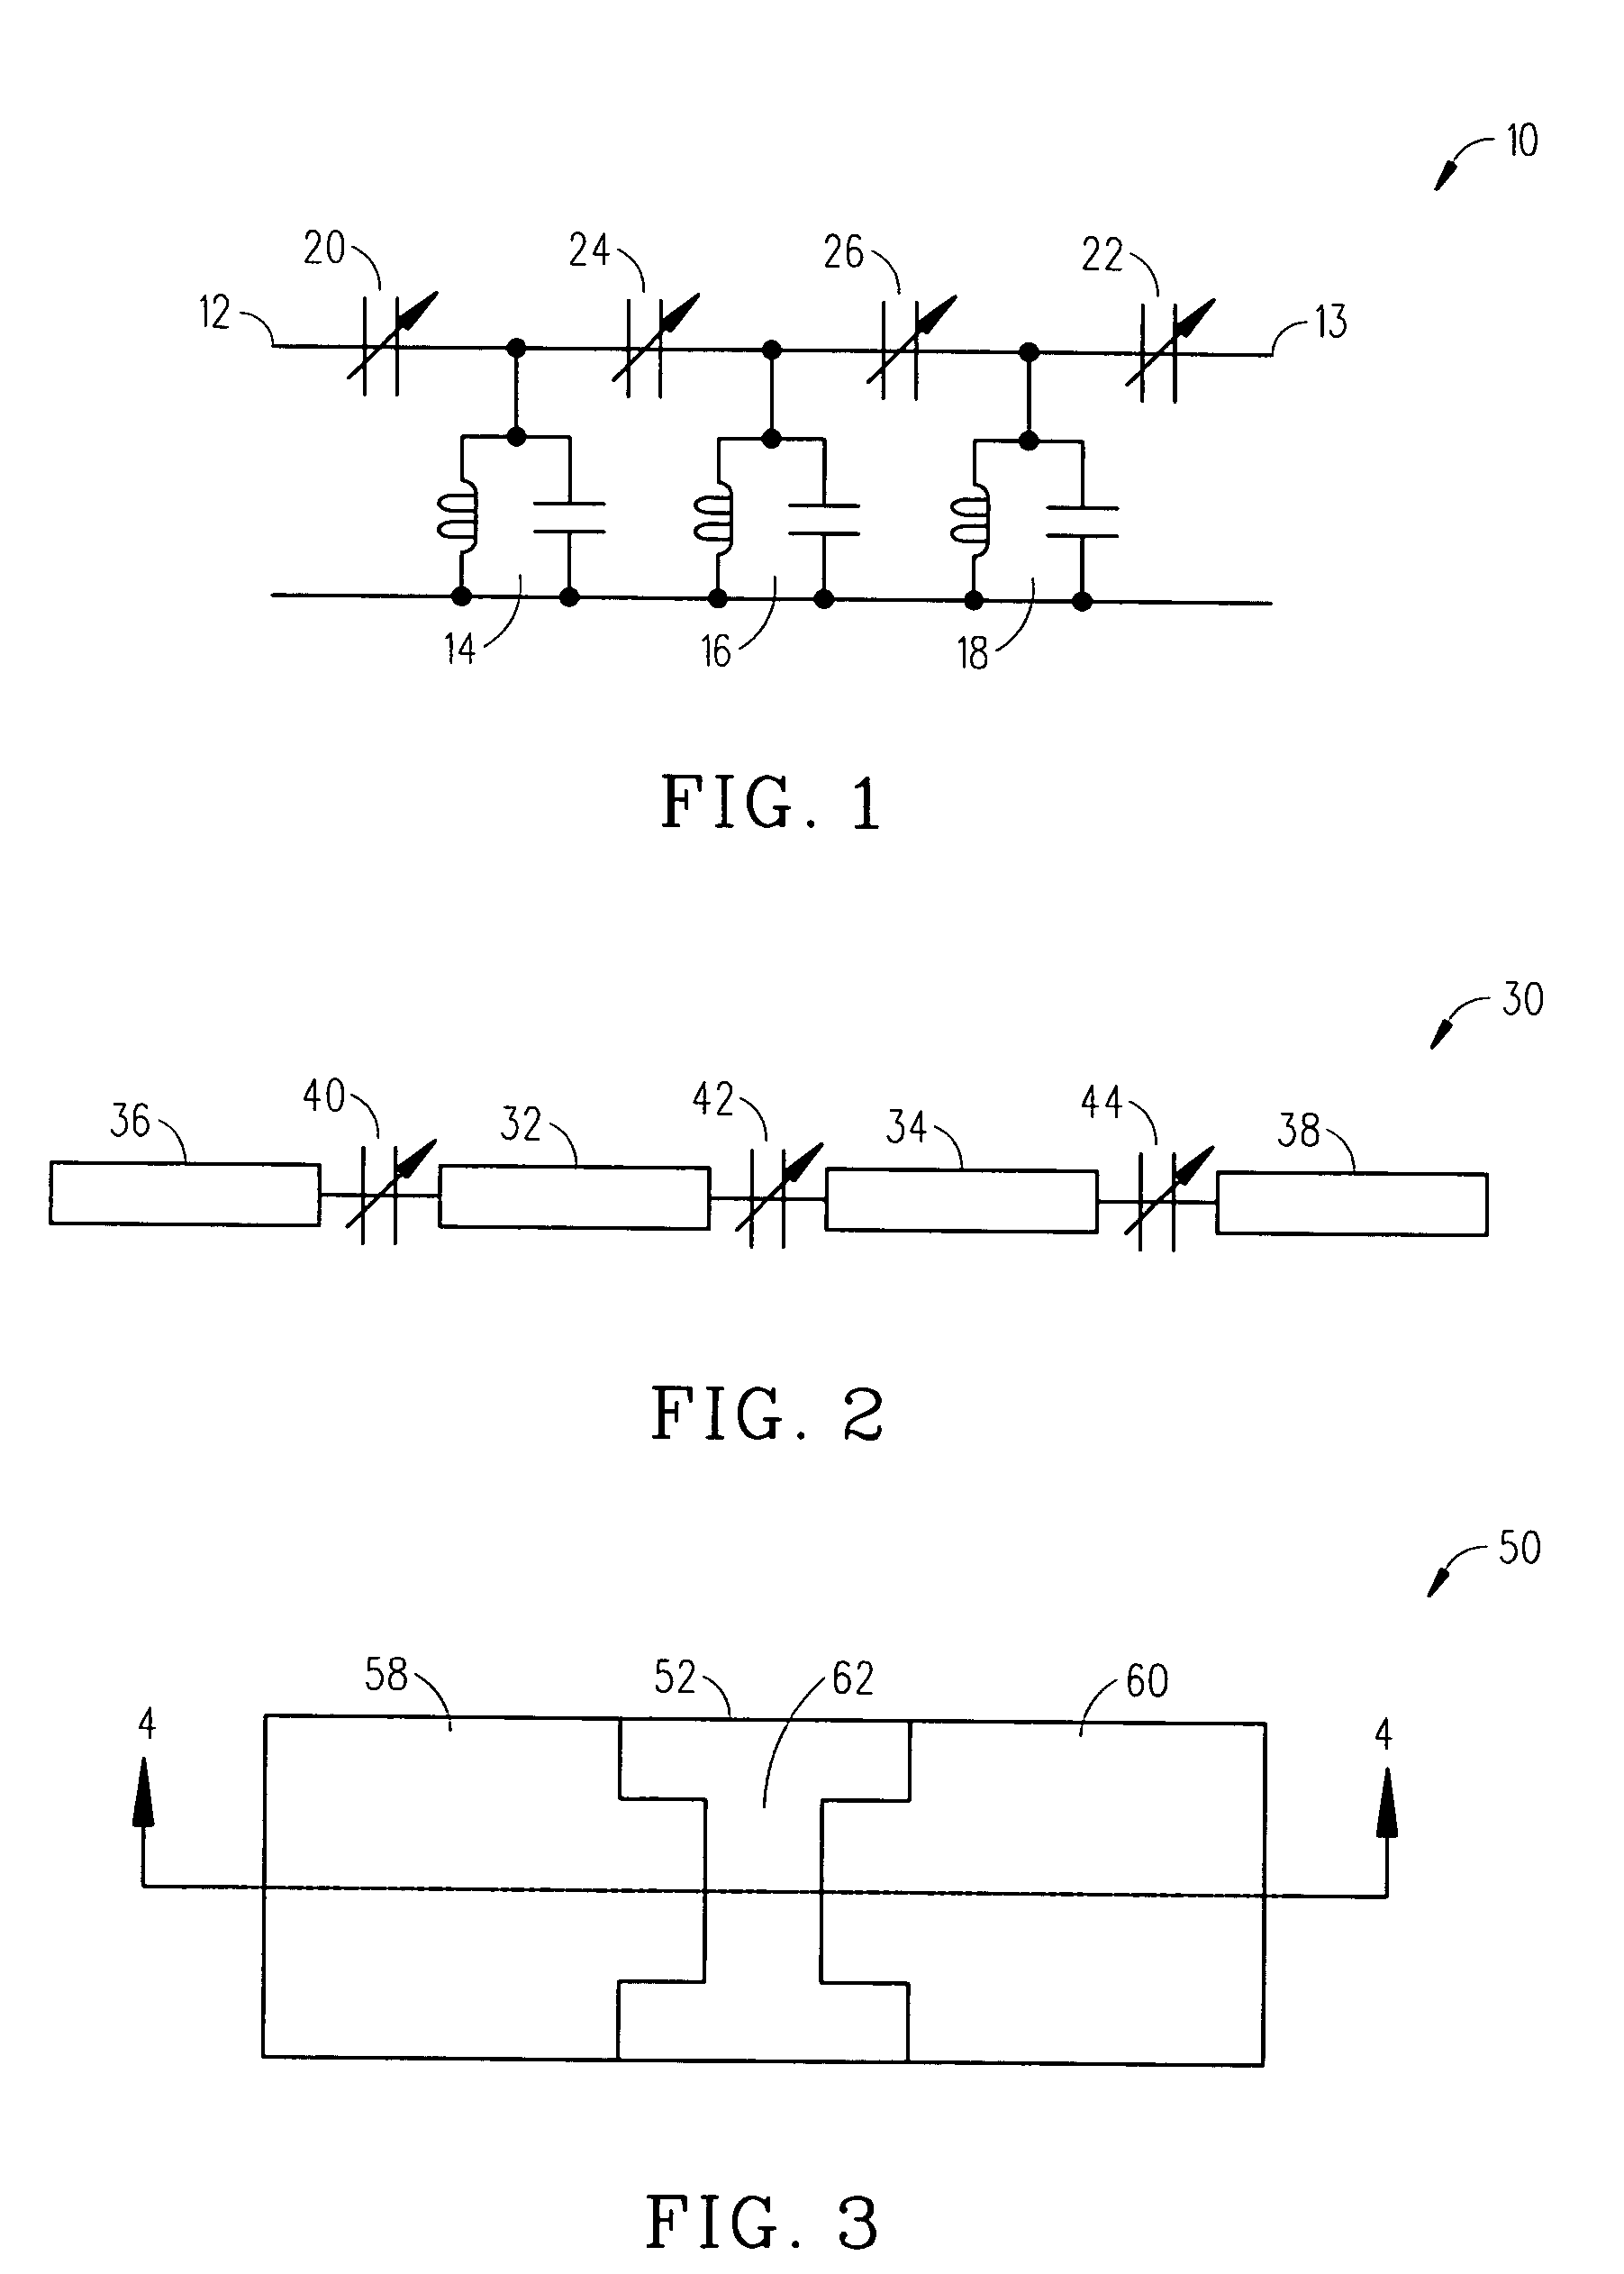 Feed forward amplifier with multiple cancellation loops capable of reducing intermodulation distortion and receive band noise